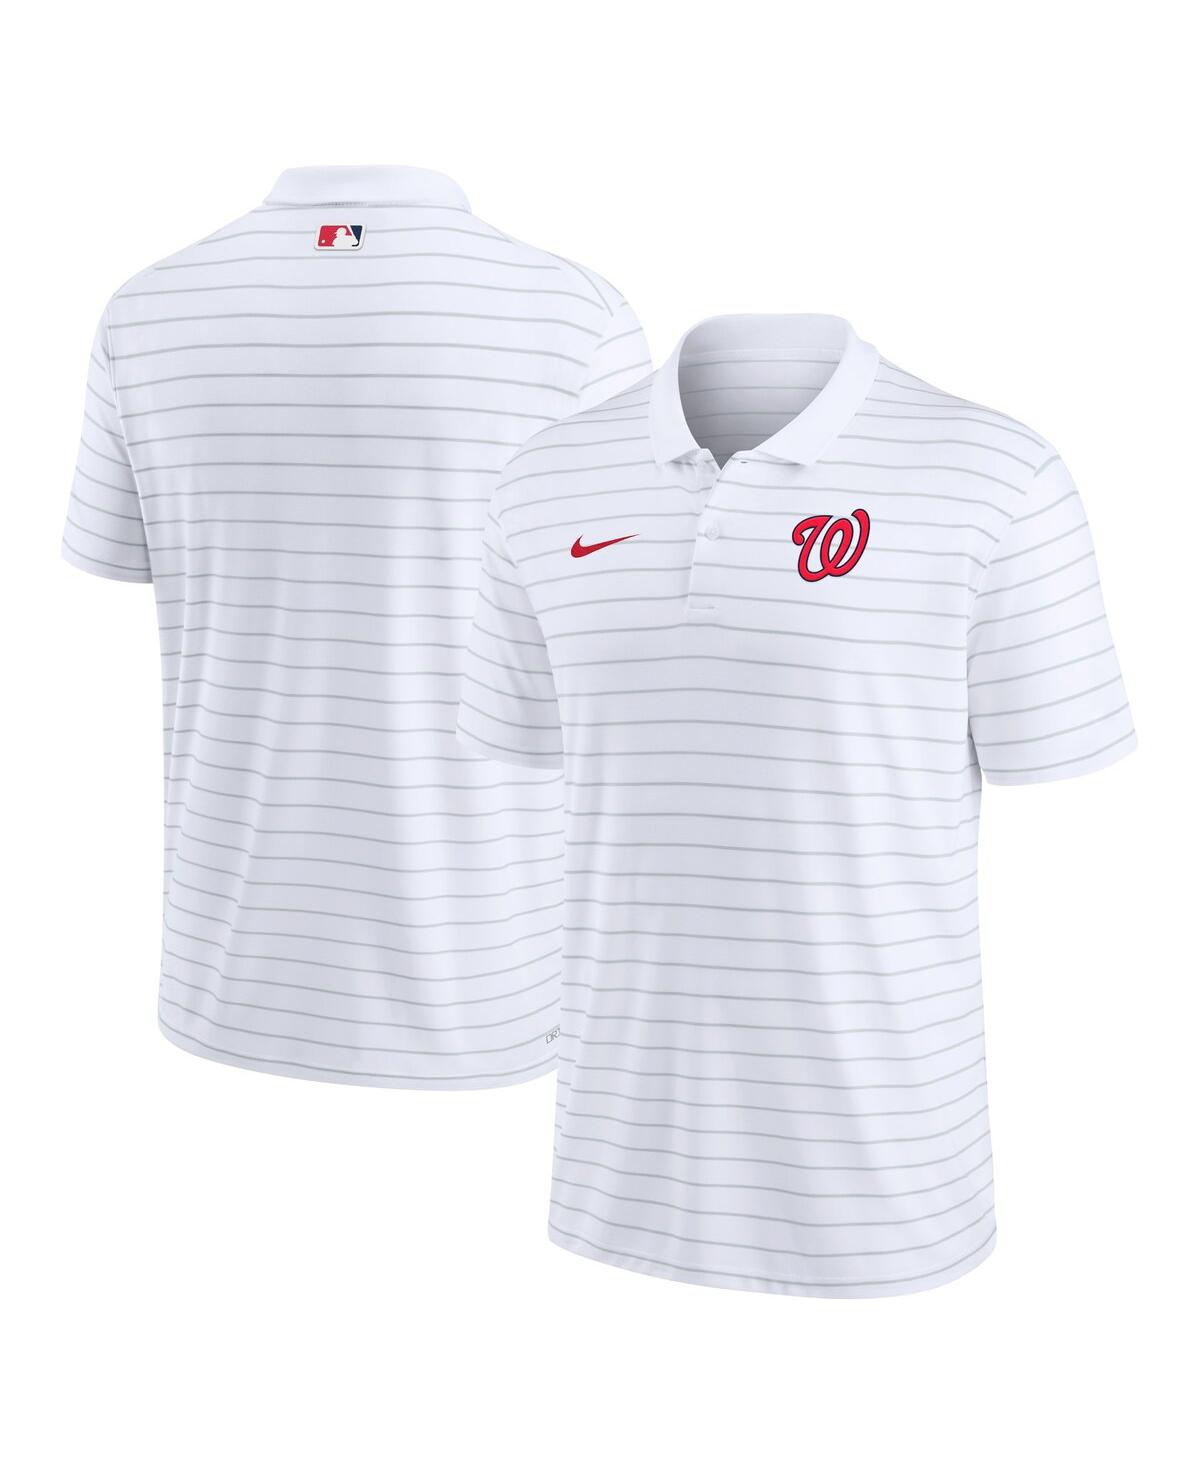 Men's Nike White Washington Nationals Authentic Collection Victory Striped Performance Polo Shirt - White